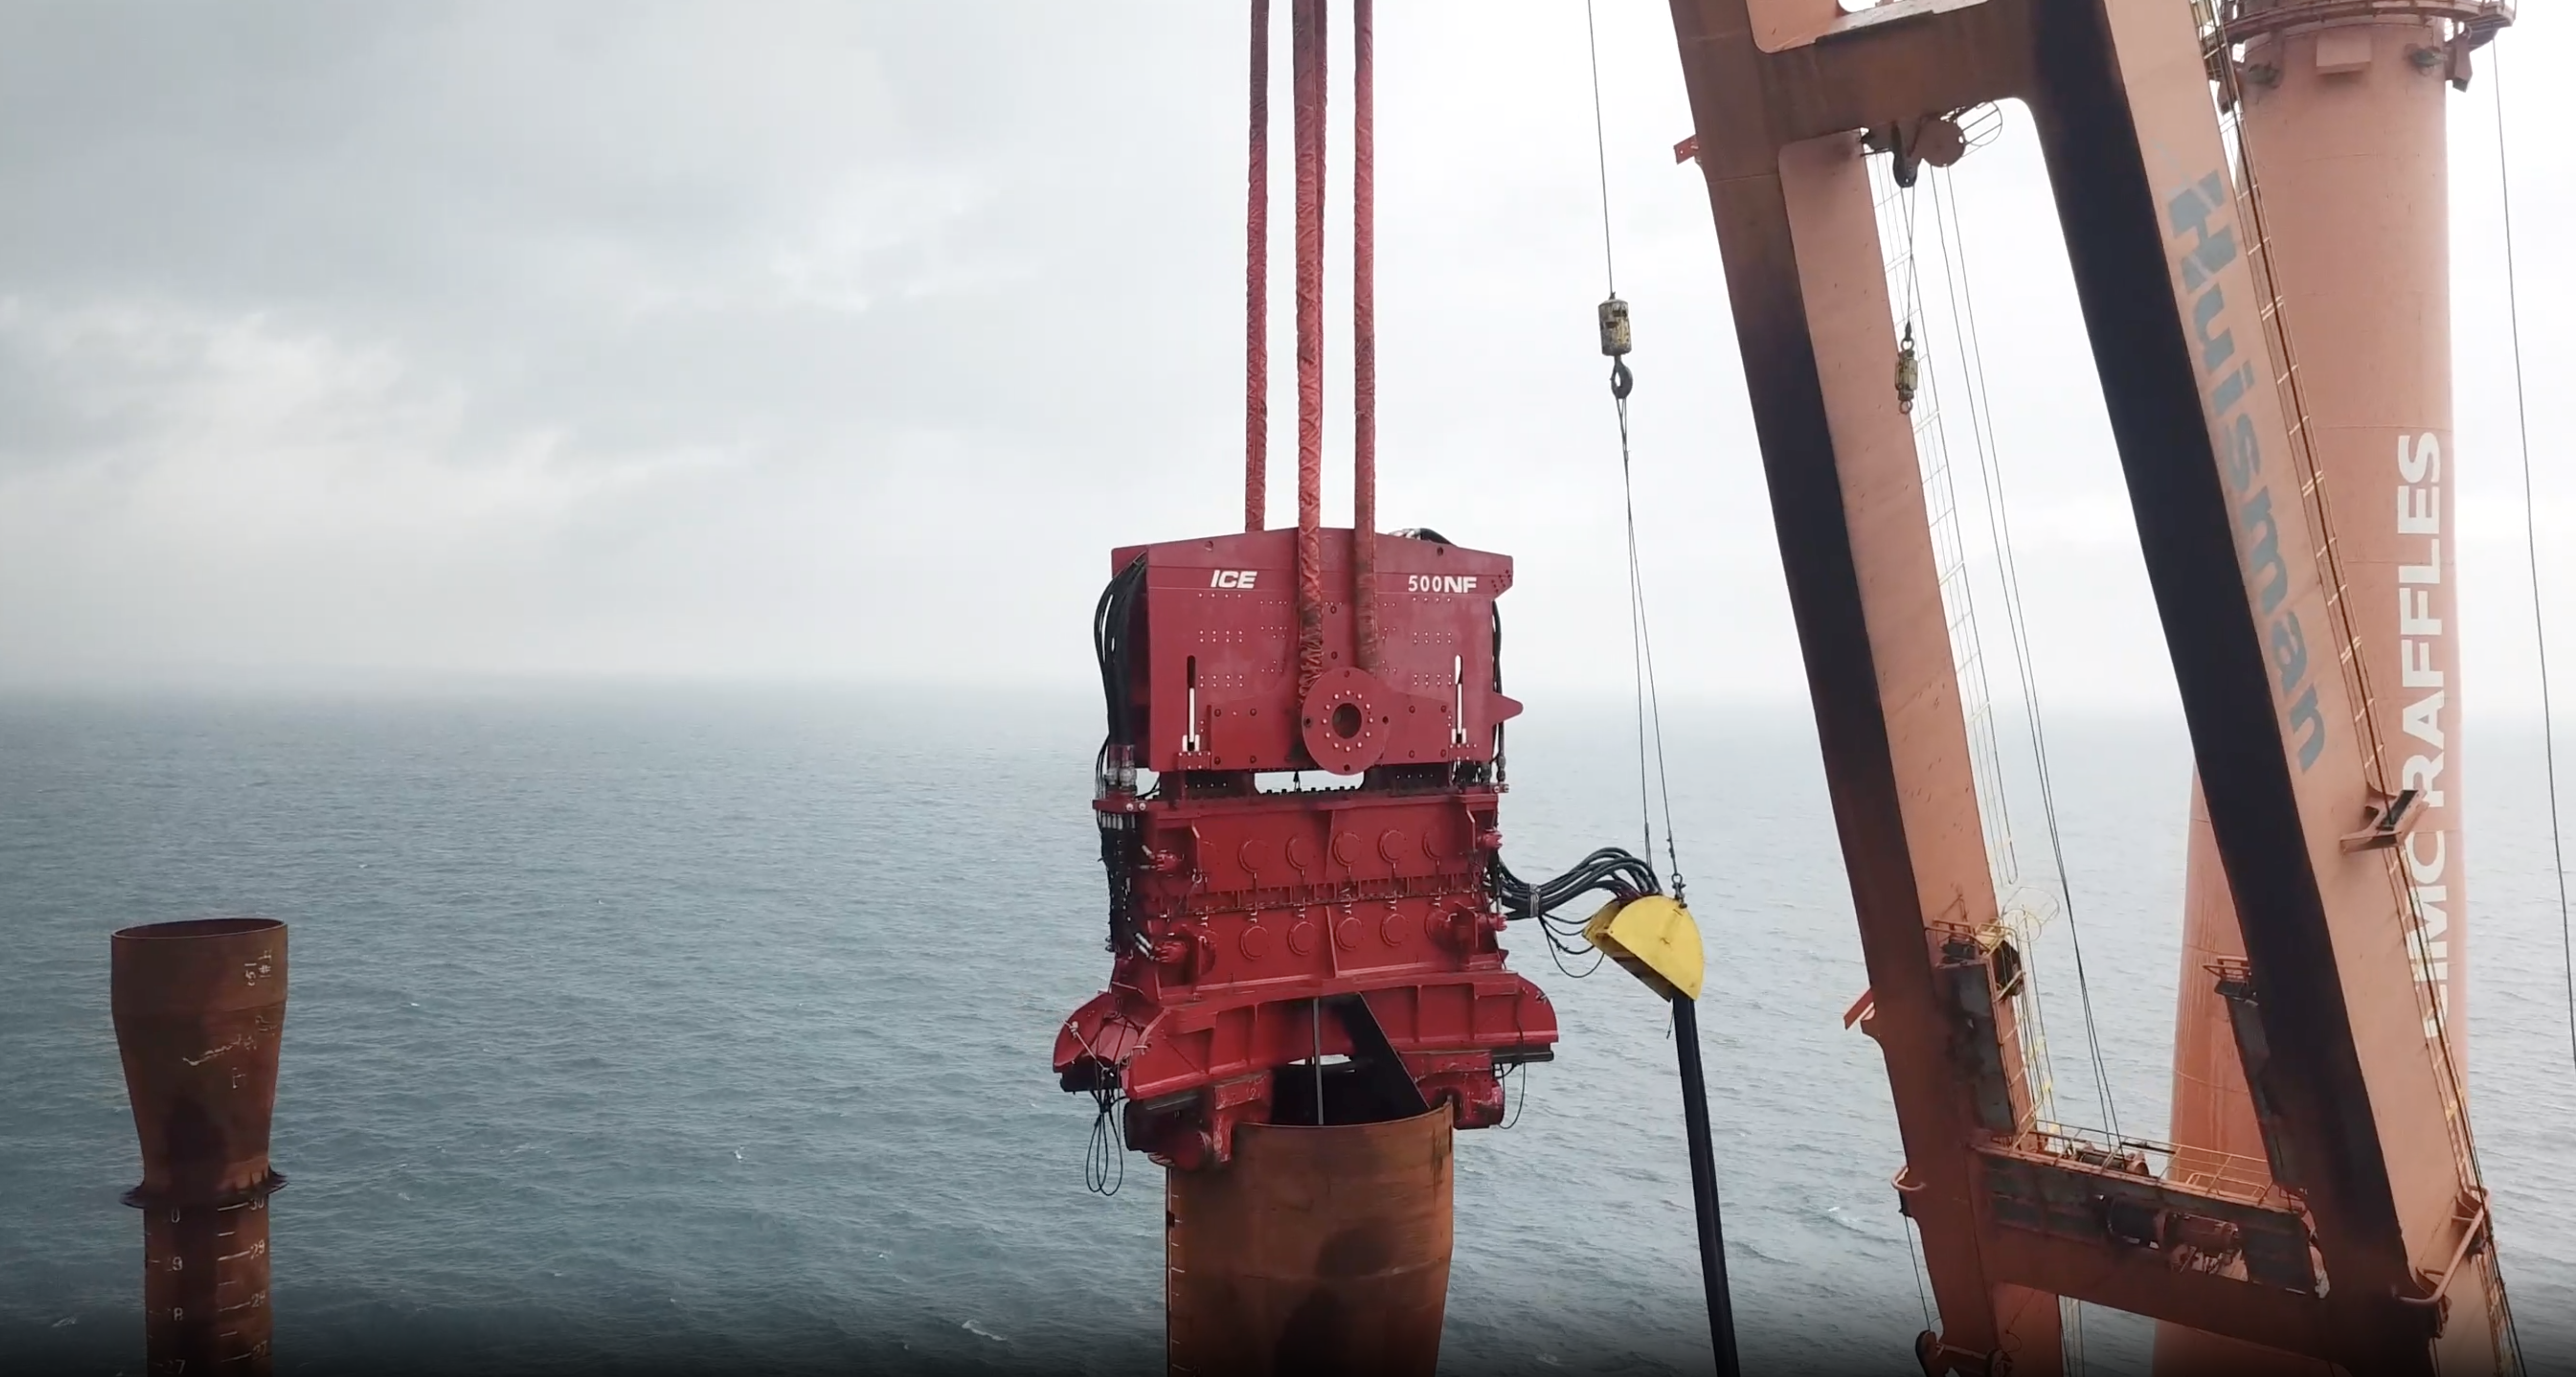 ICE's largest: 500NF working offshore